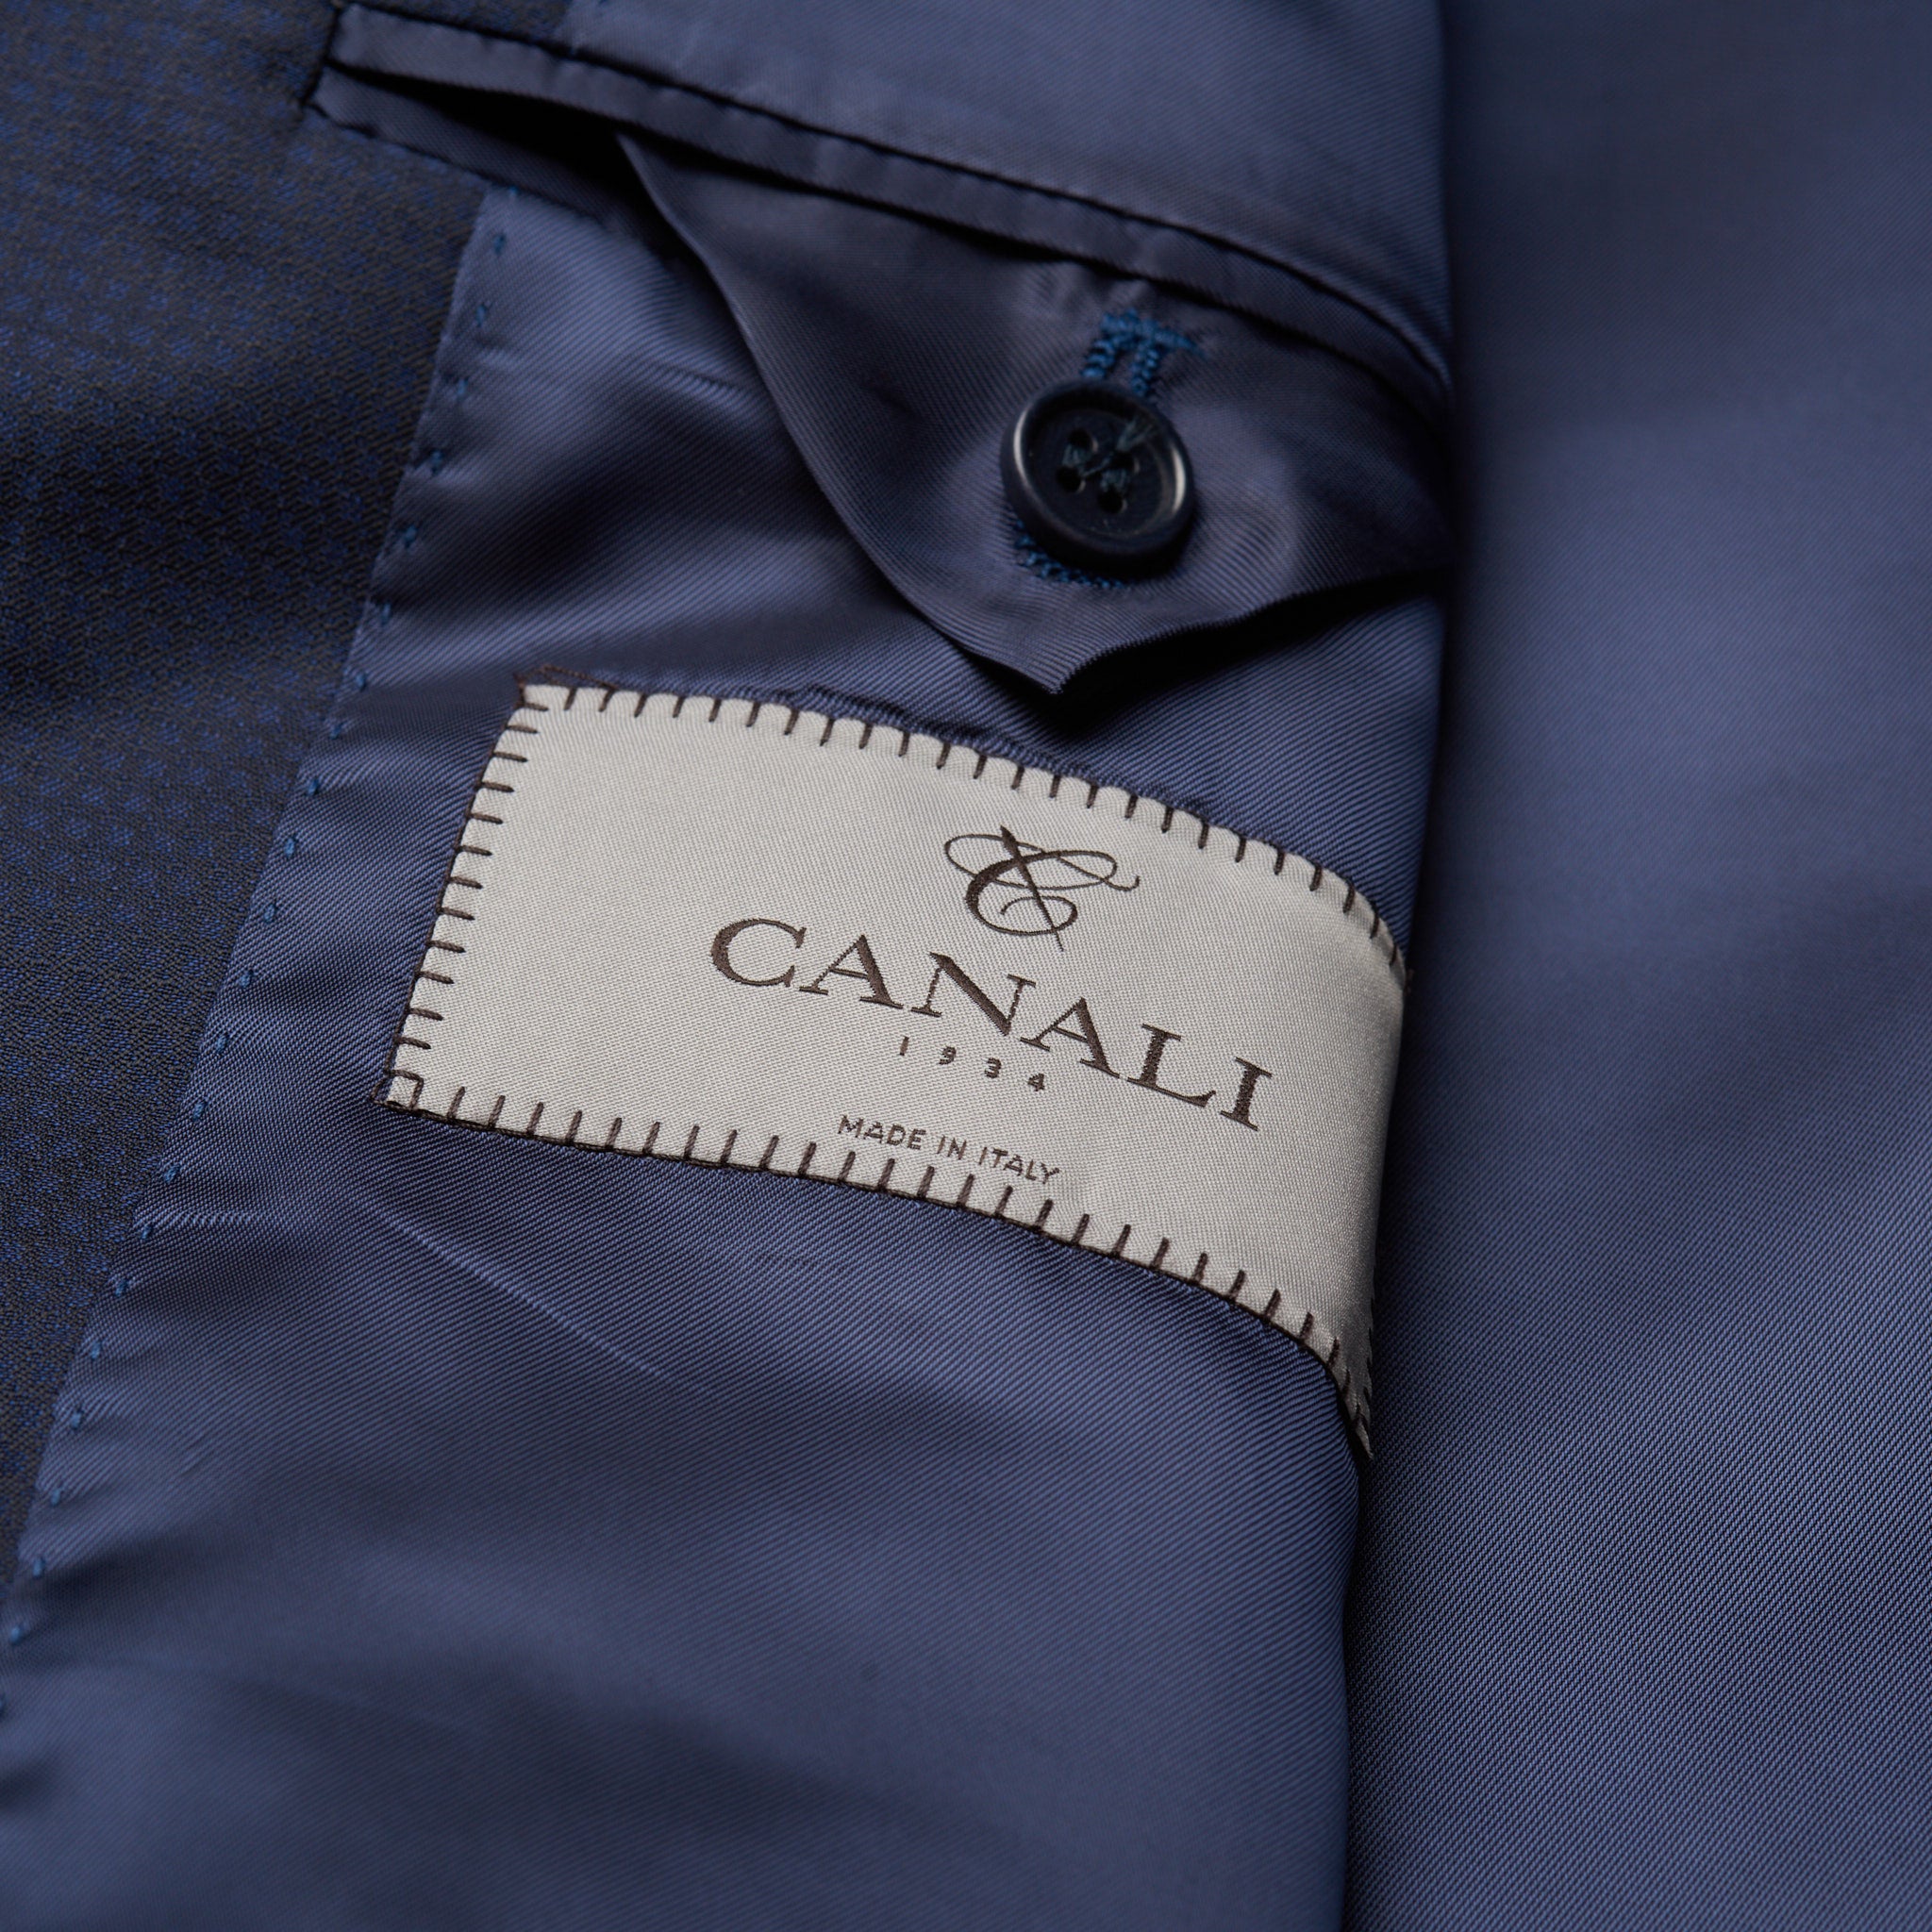 CANALI 1934 "Travel" Navy Blue Jacquard Wool-Mohair Suit 56 NEW 46 Current Model CANALI